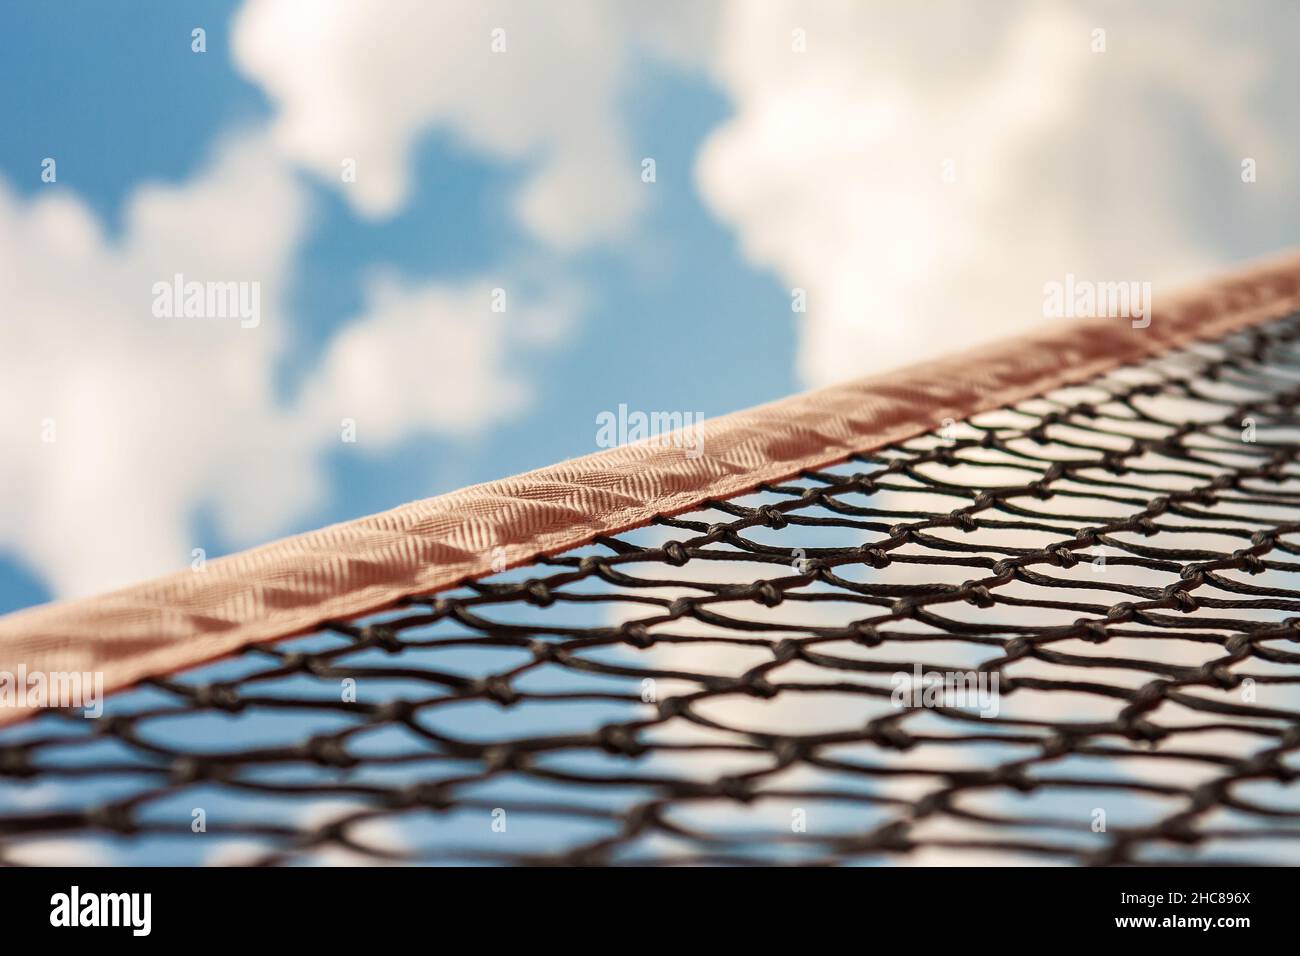 Тennis sport net against the bright blue sky with clouds. Stock Photo